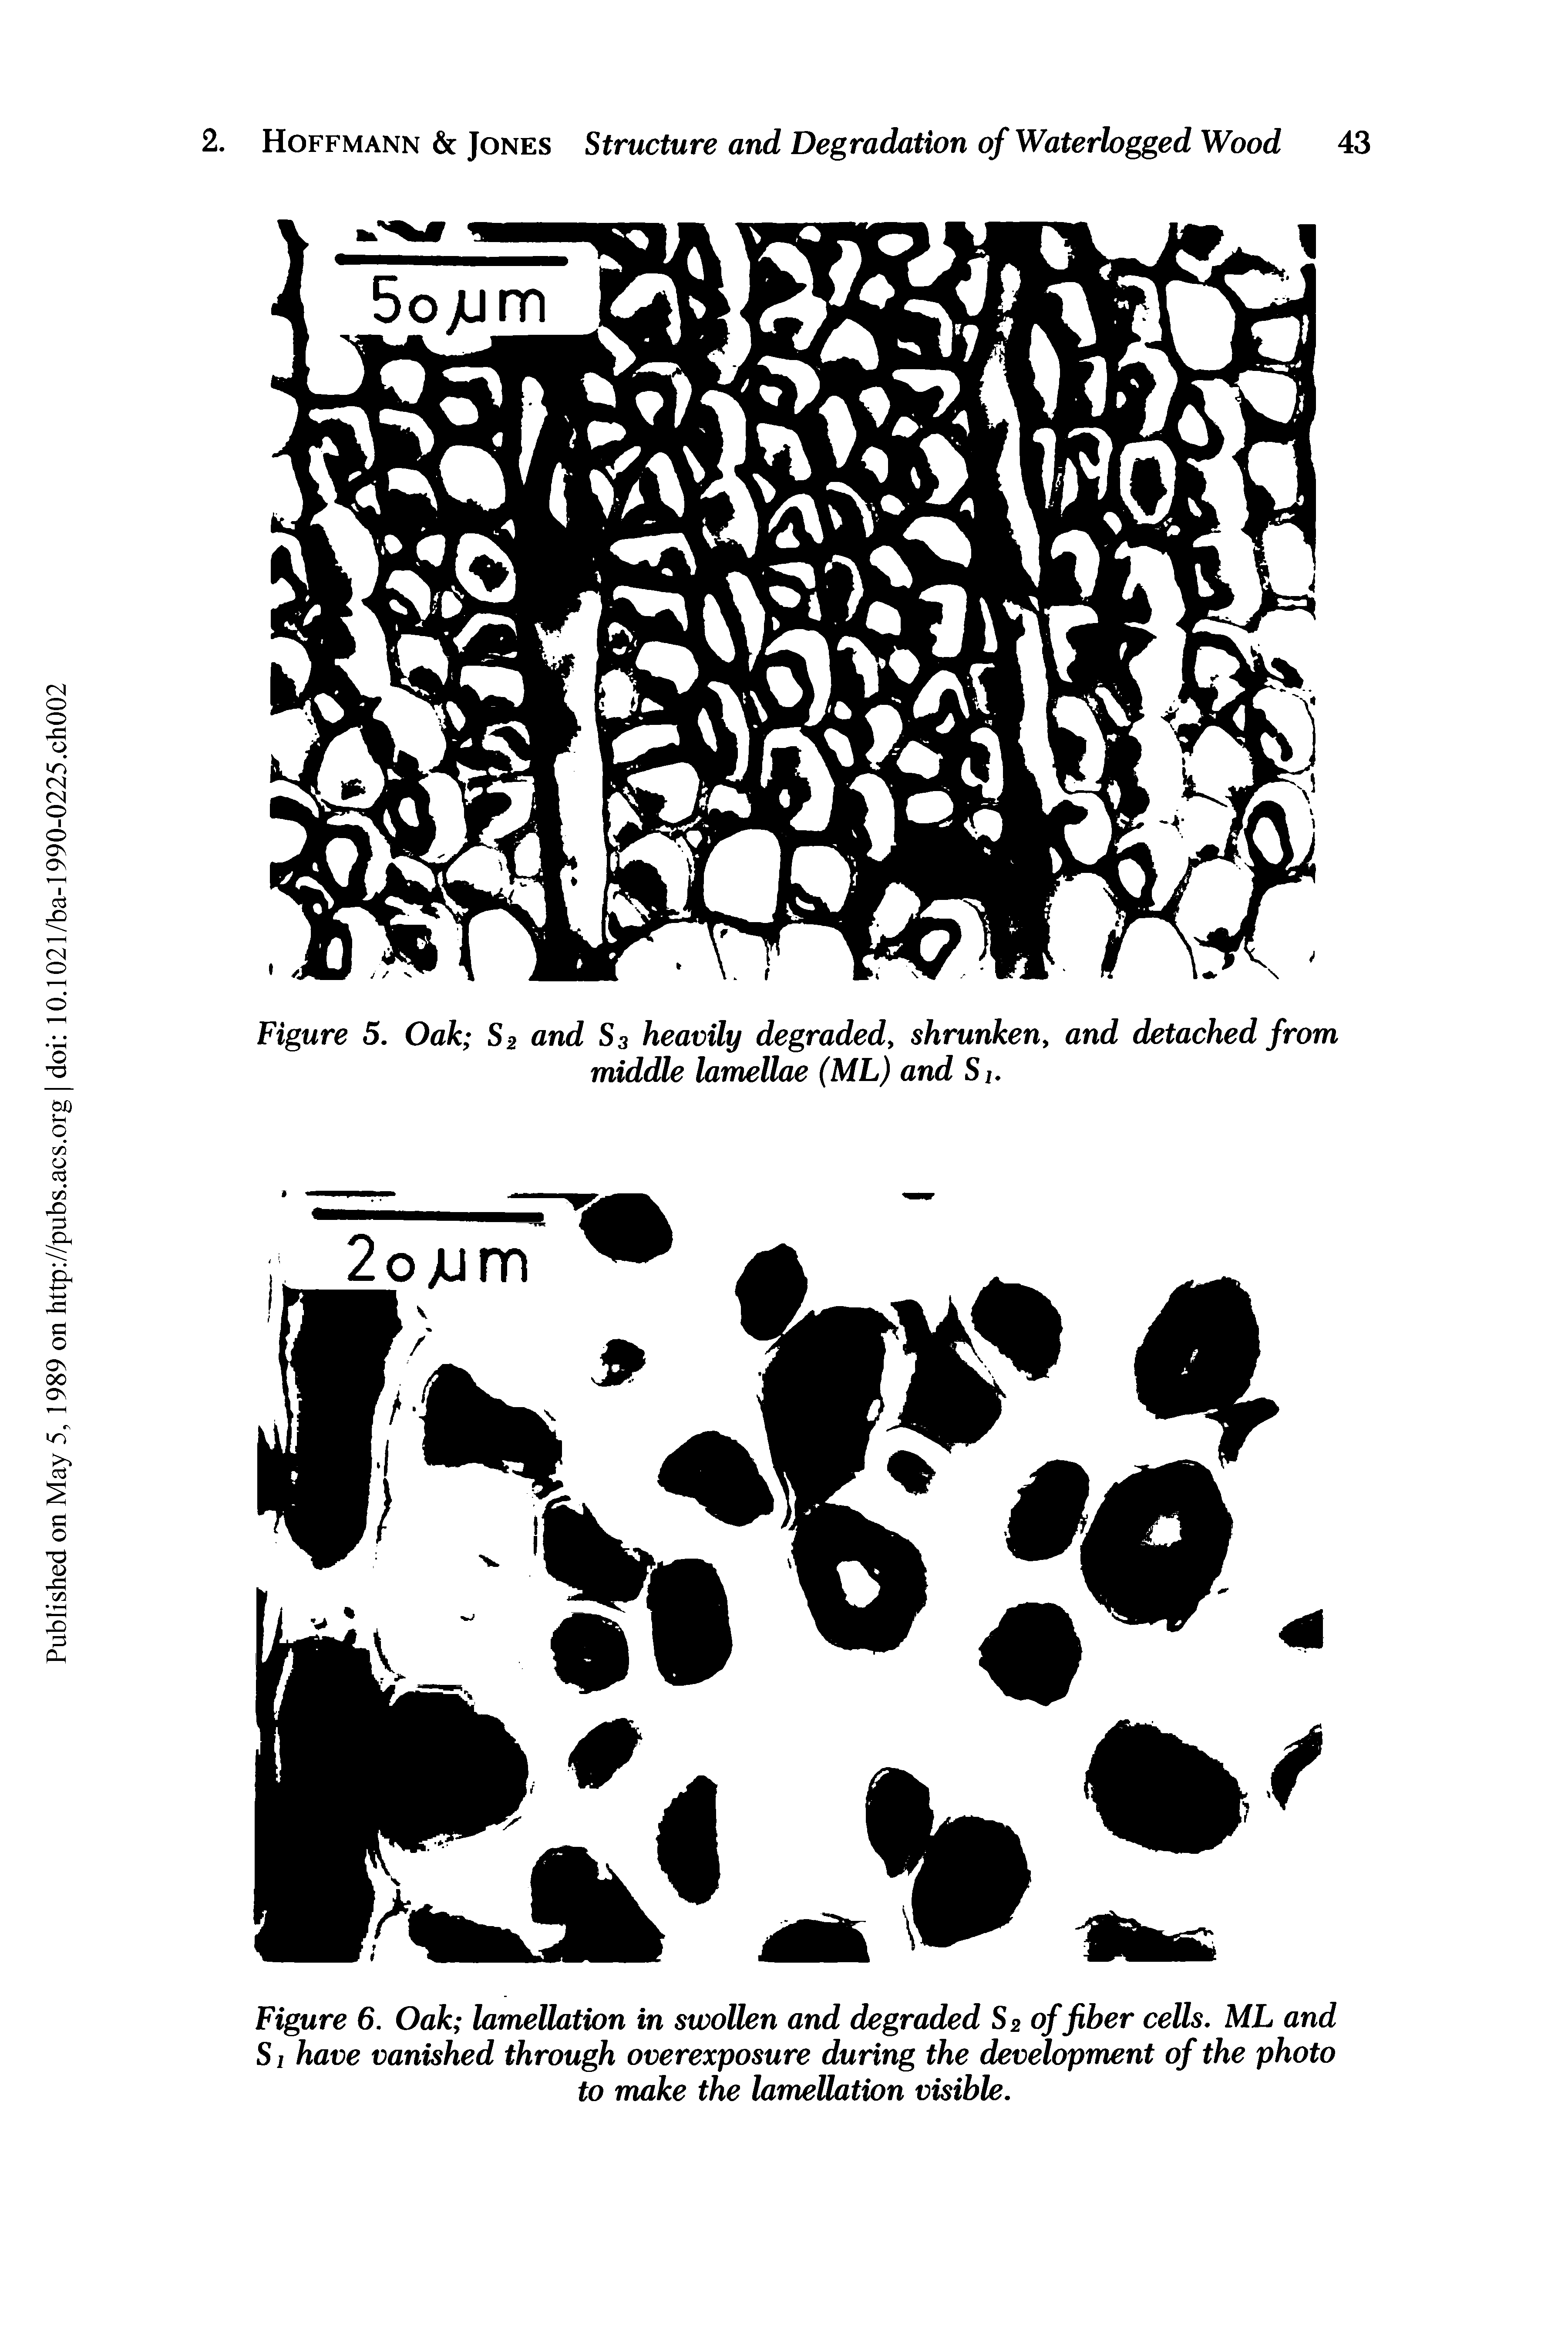 Figure 6. Oak lamellation in swollen and degraded S2 of fiber cells. ML and SI have vanished through overexposure during the development of the photo to make the lamellation visible.